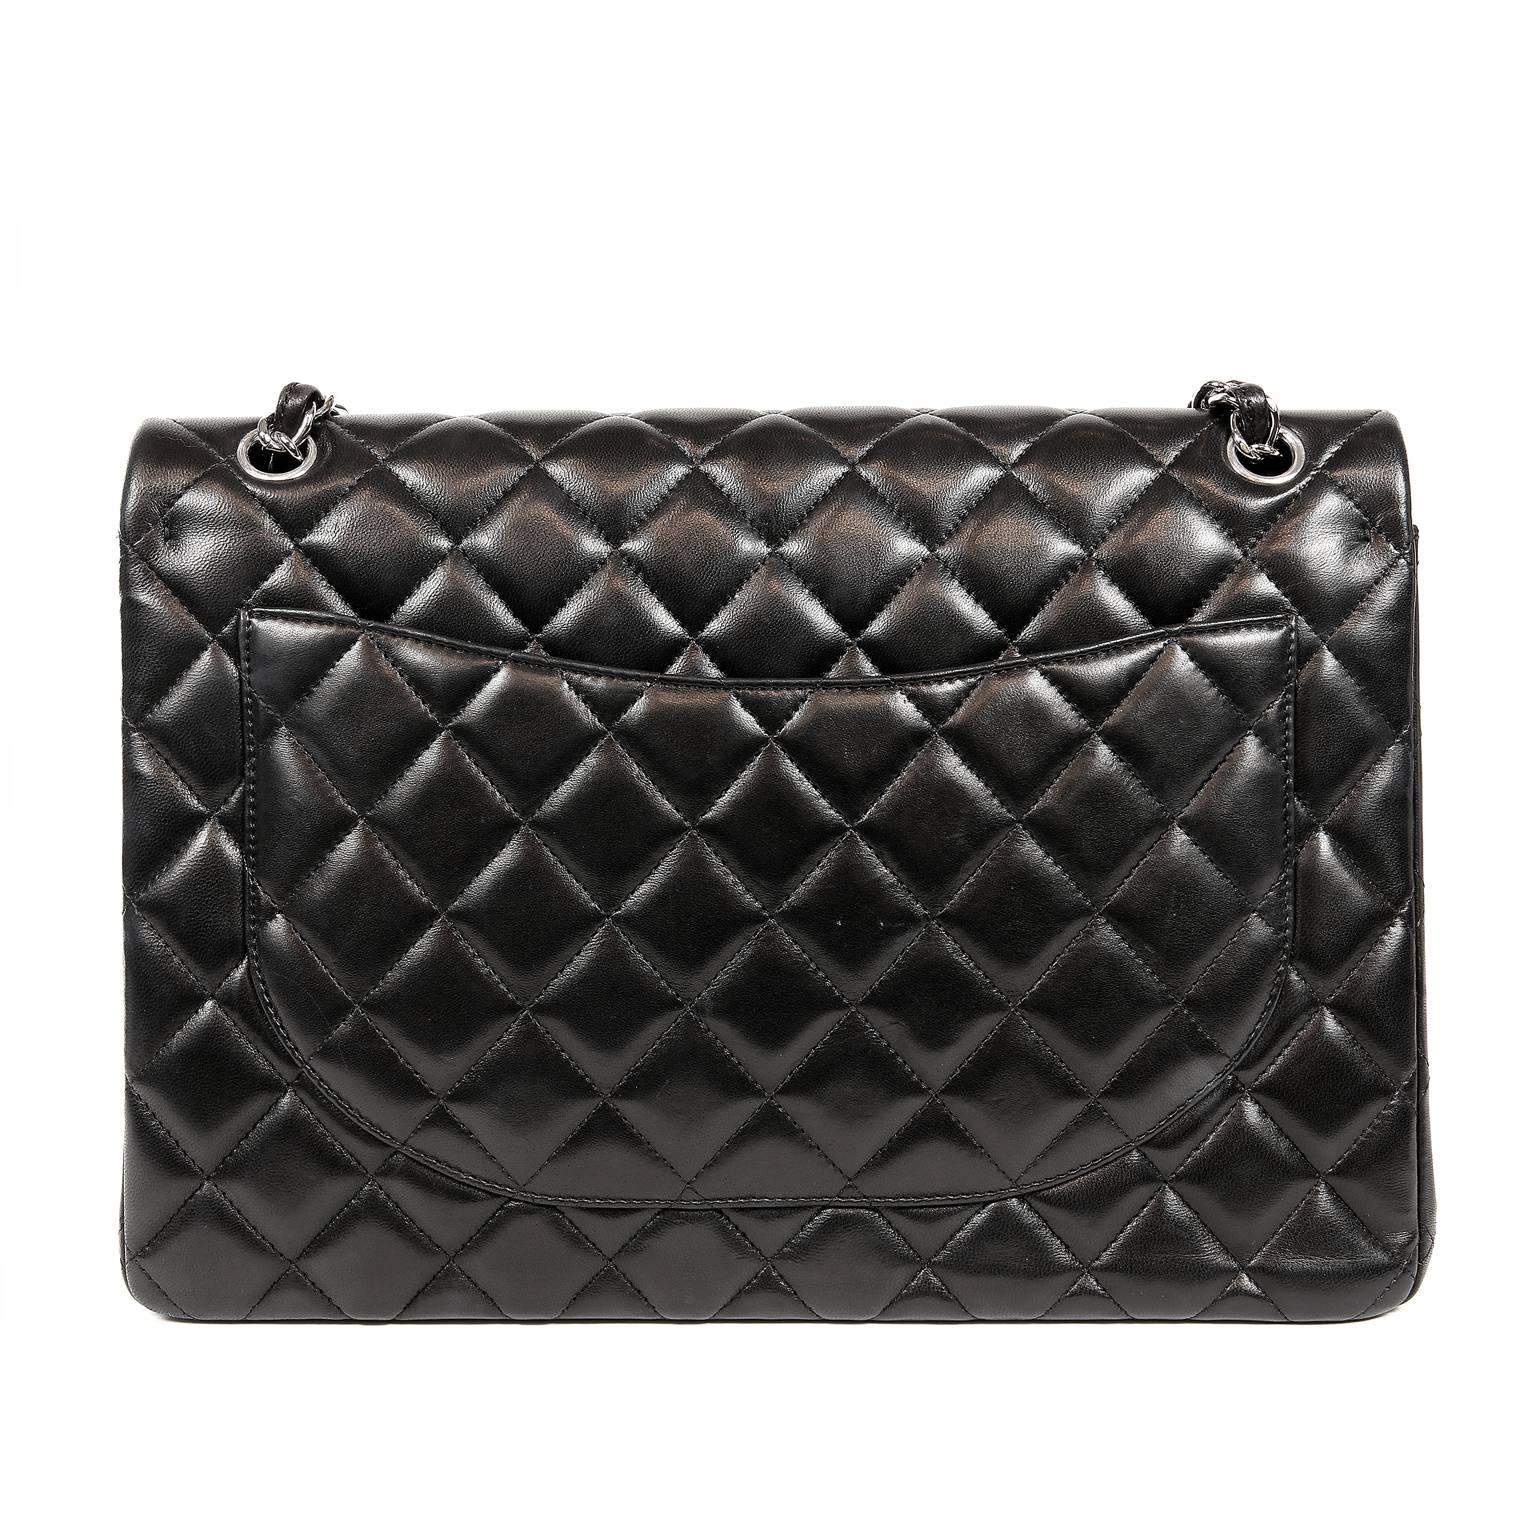 Chanel Black Lambskin Classic Maxi- MINT condition
The largest of the classics, the Maxi is a must have in any collection.
Black lambskin is quilted in signature Chanel diamond pattern.  Silver interlocking CC twist lock secures the exterior flap. 